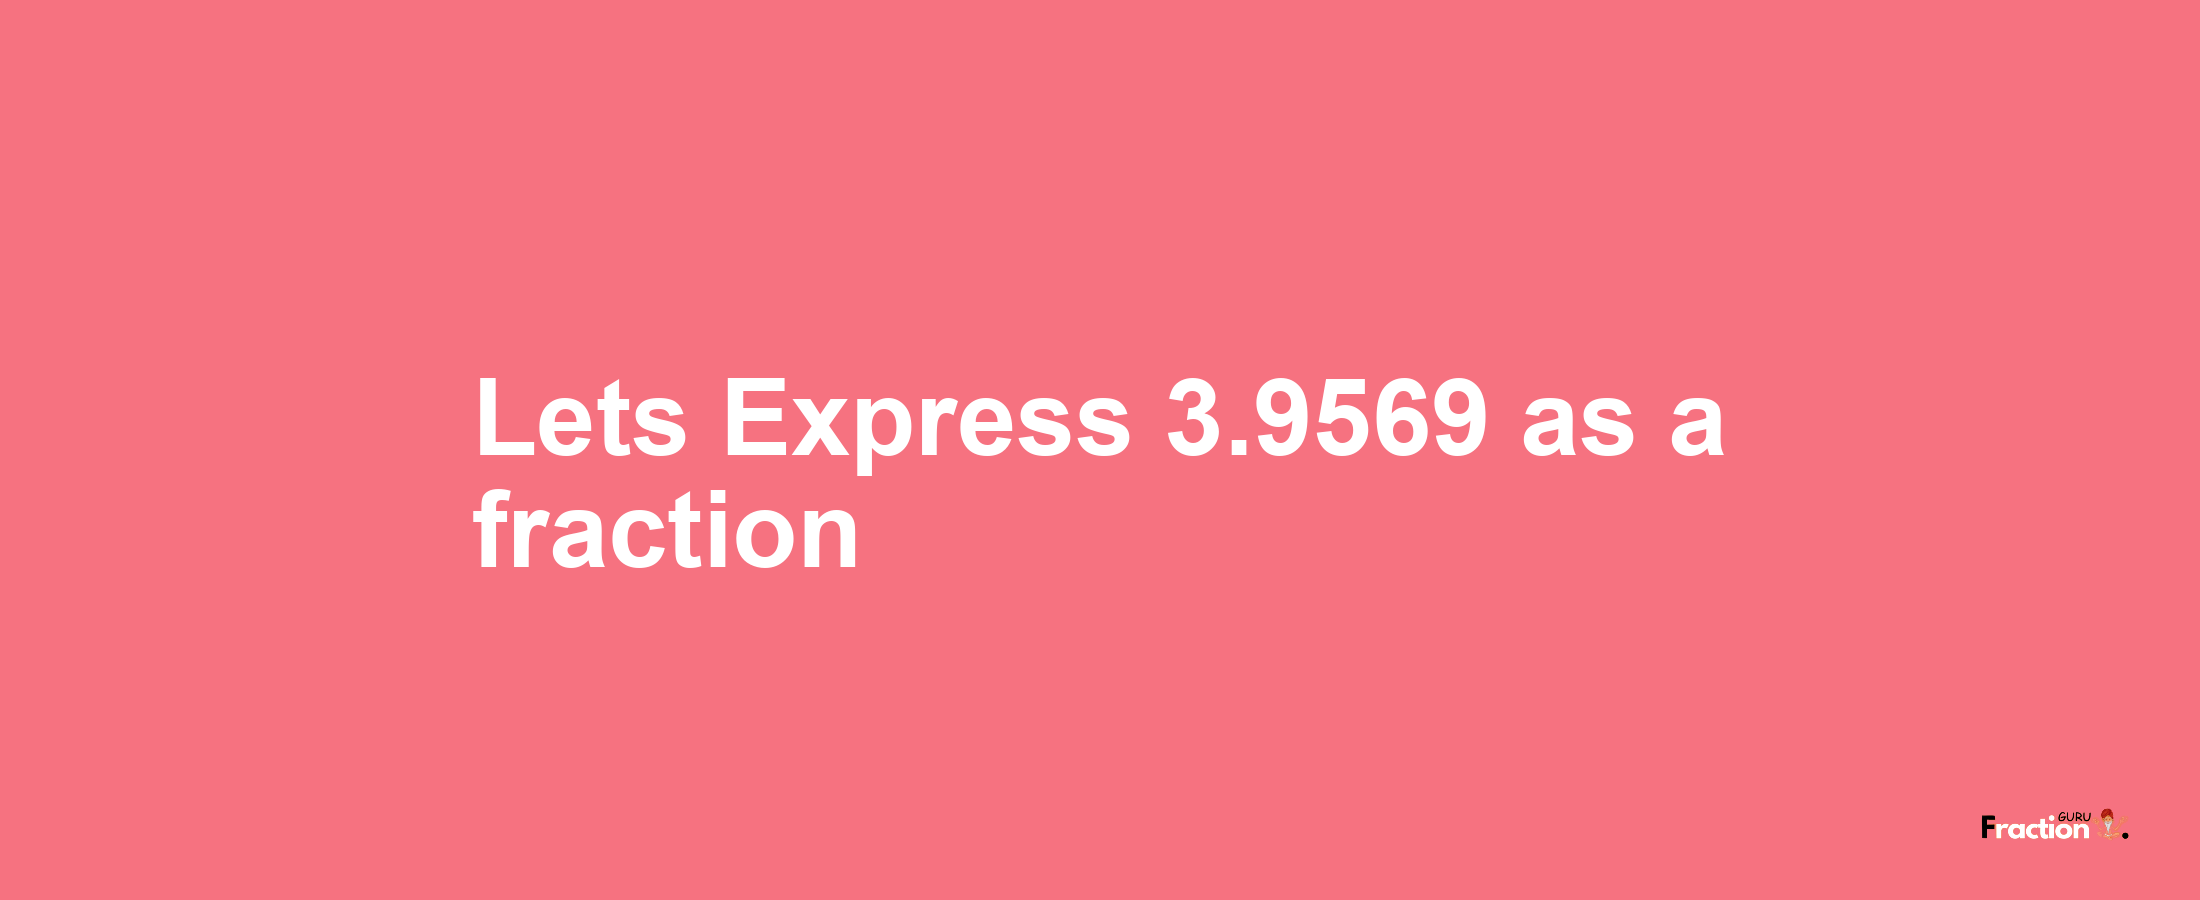 Lets Express 3.9569 as afraction